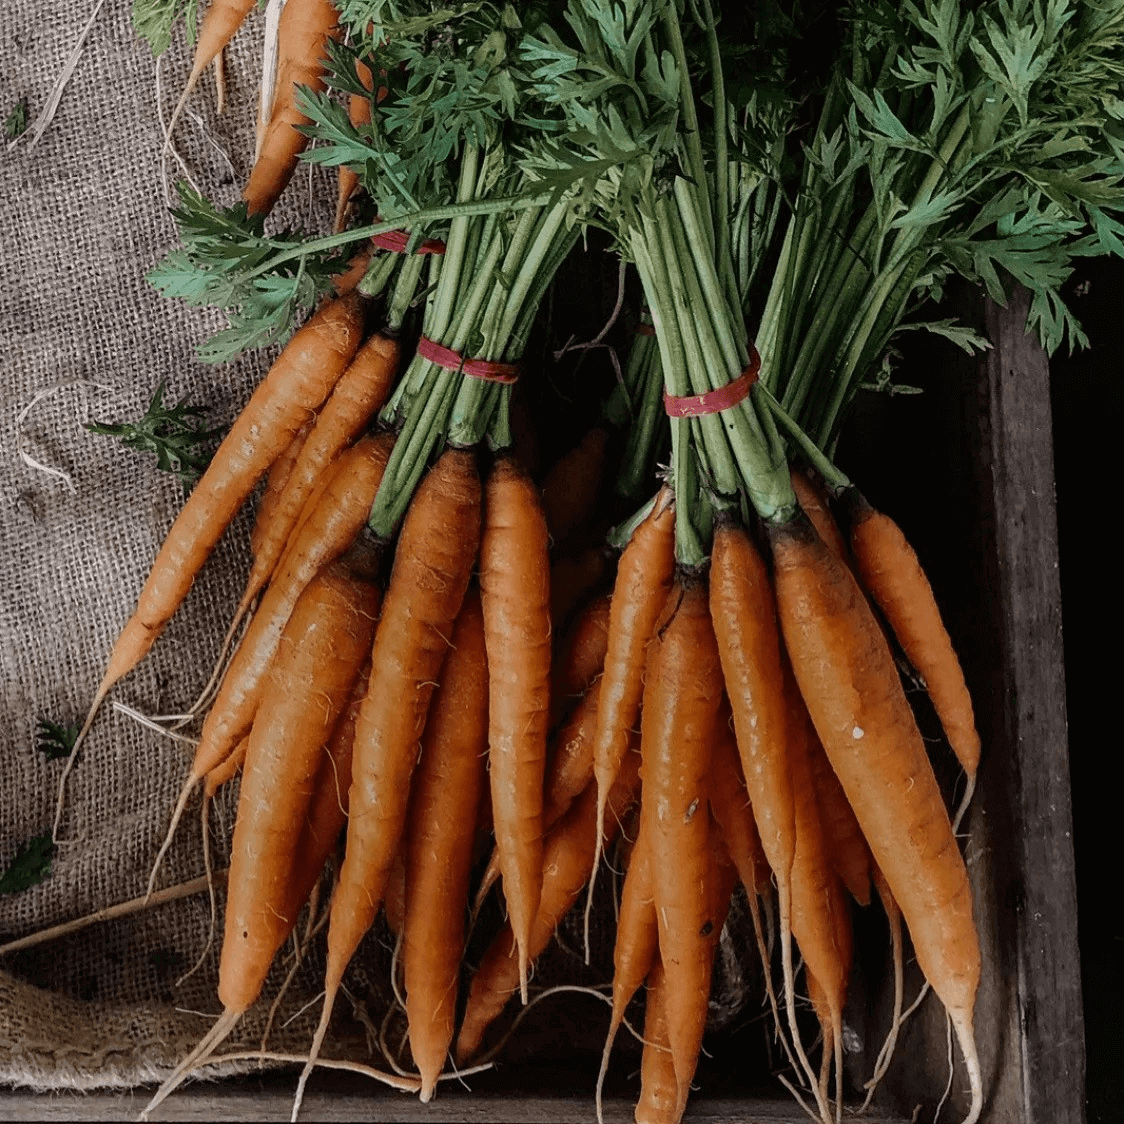 Bunch for Dutch carrots from NSW Central Coast farmers